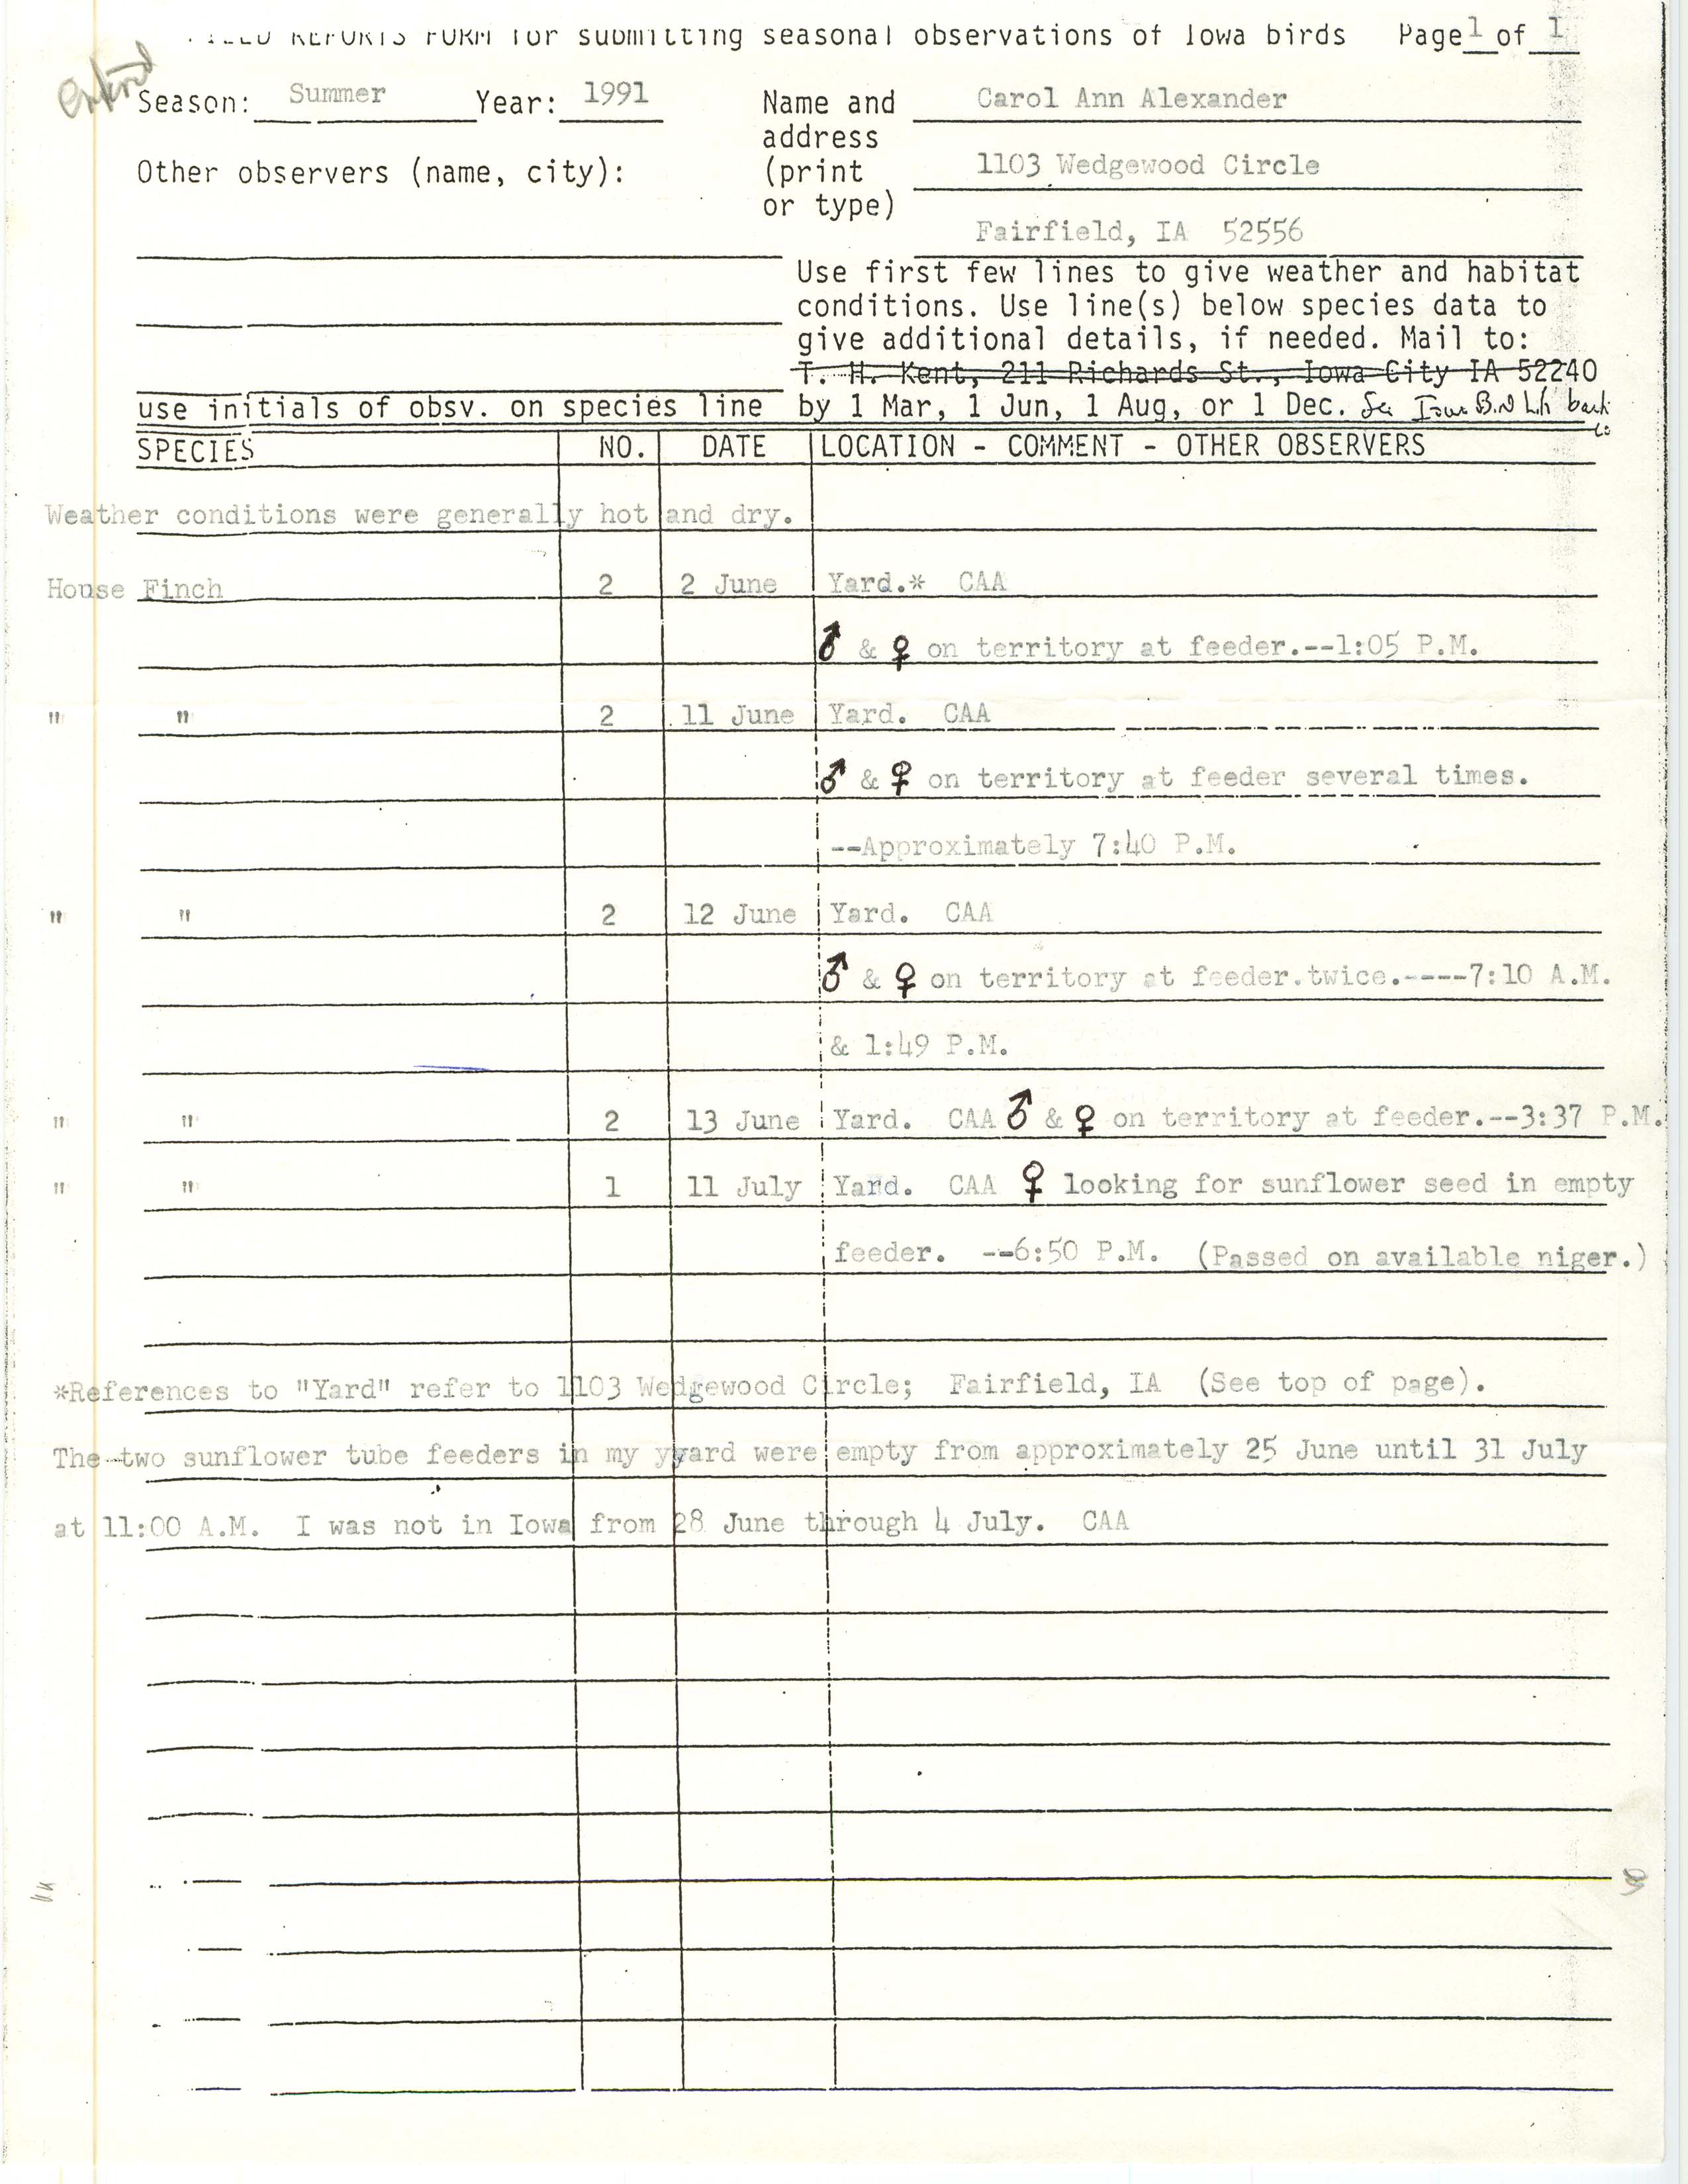 Field reports form for submitting seasonal observations of Iowa birds, Carol Ann Alexander, summer 1991